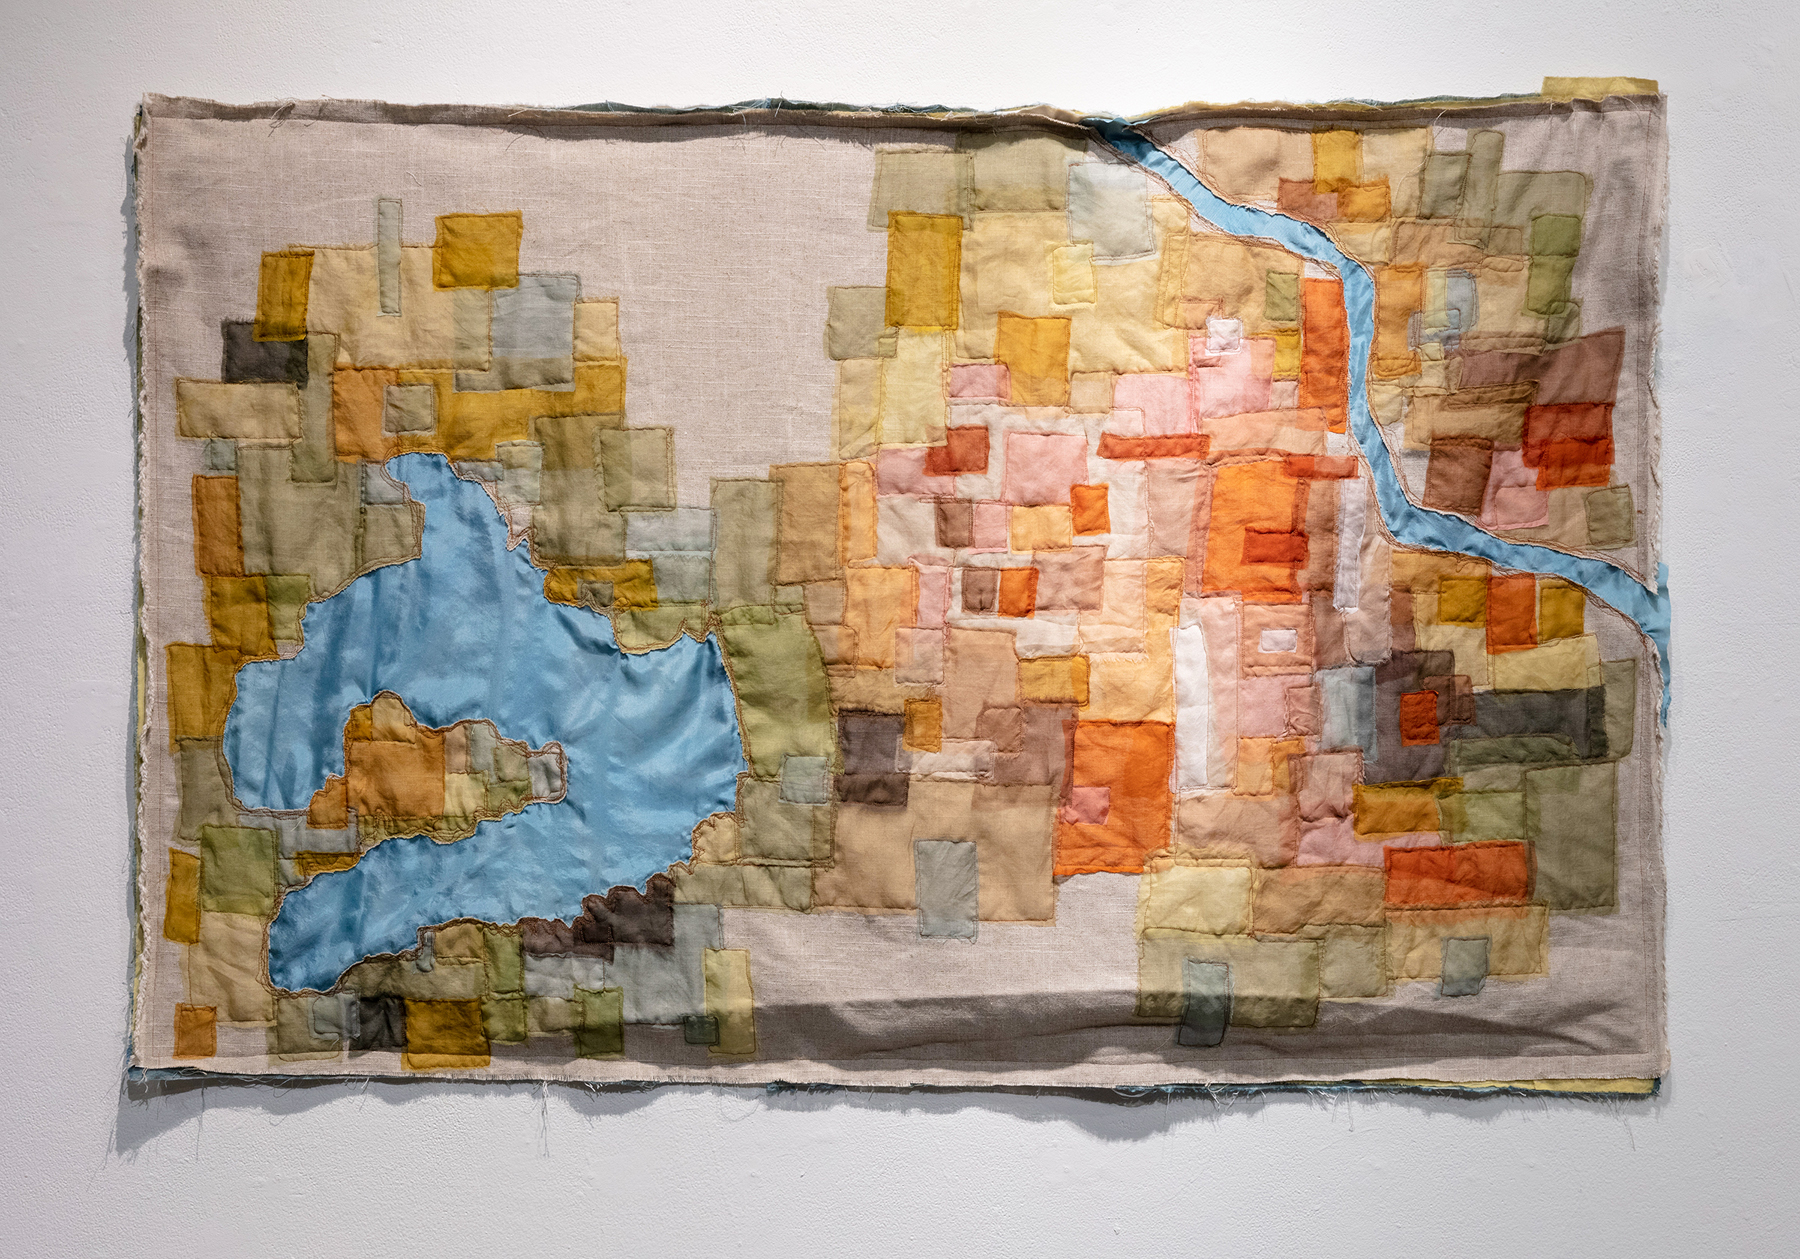 fabric map of Lawrence, KS, made from sewn squares and rectangles in a variety of shades of green, brown, yellow, and orange